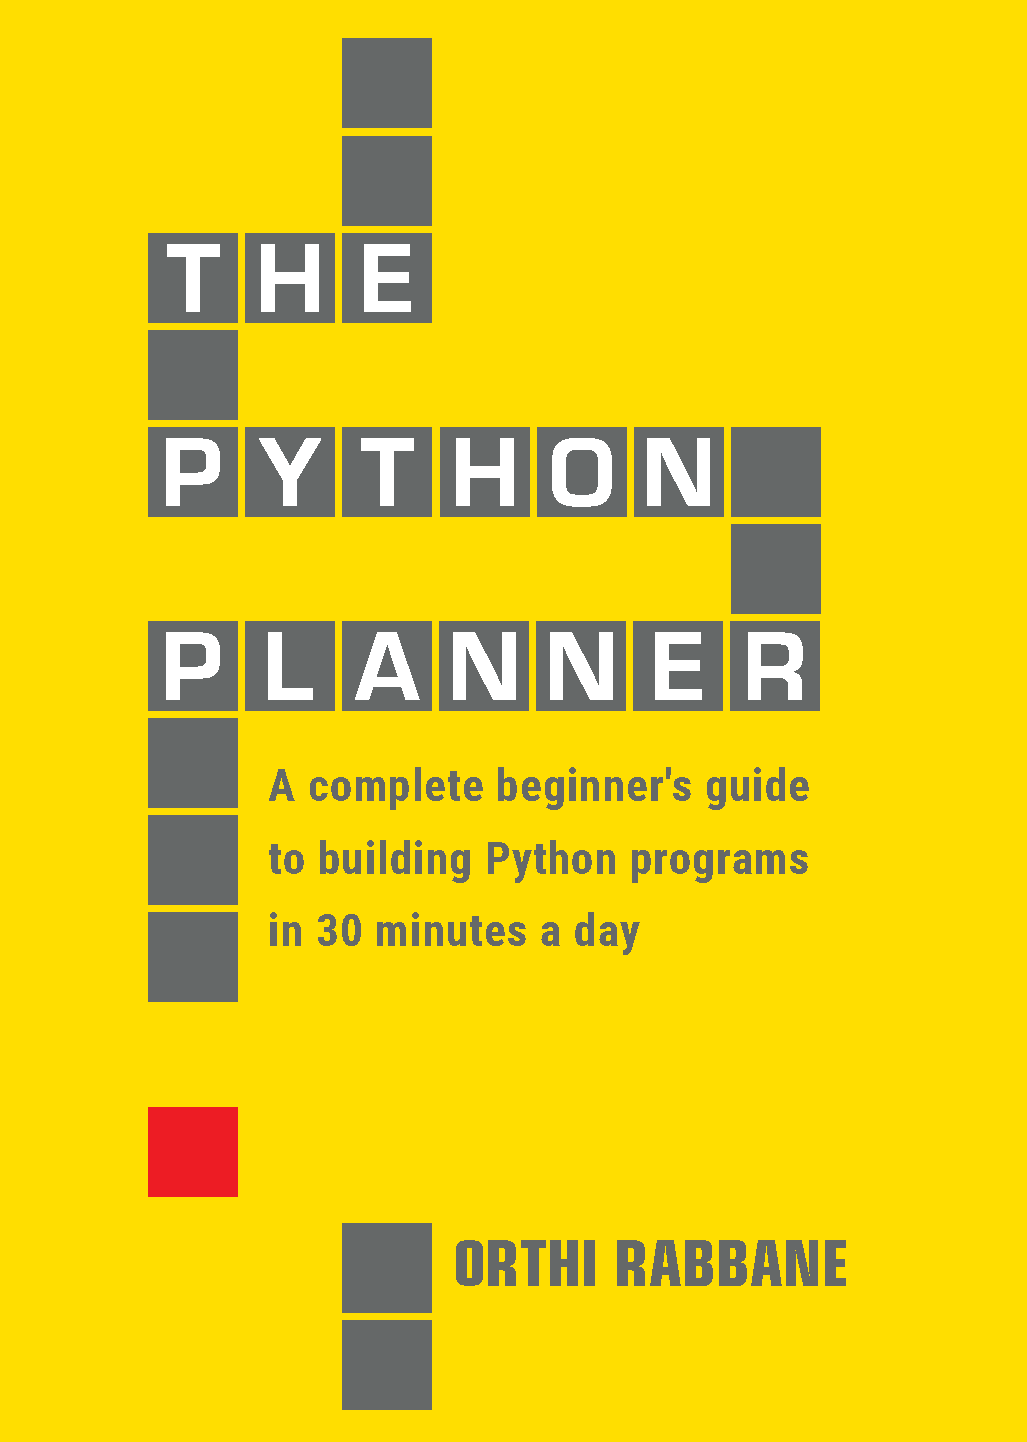 FREE: The Python Planner: A complete beginner’s guide to building Python programs in 30 minutes a day by Orthi Rabbane